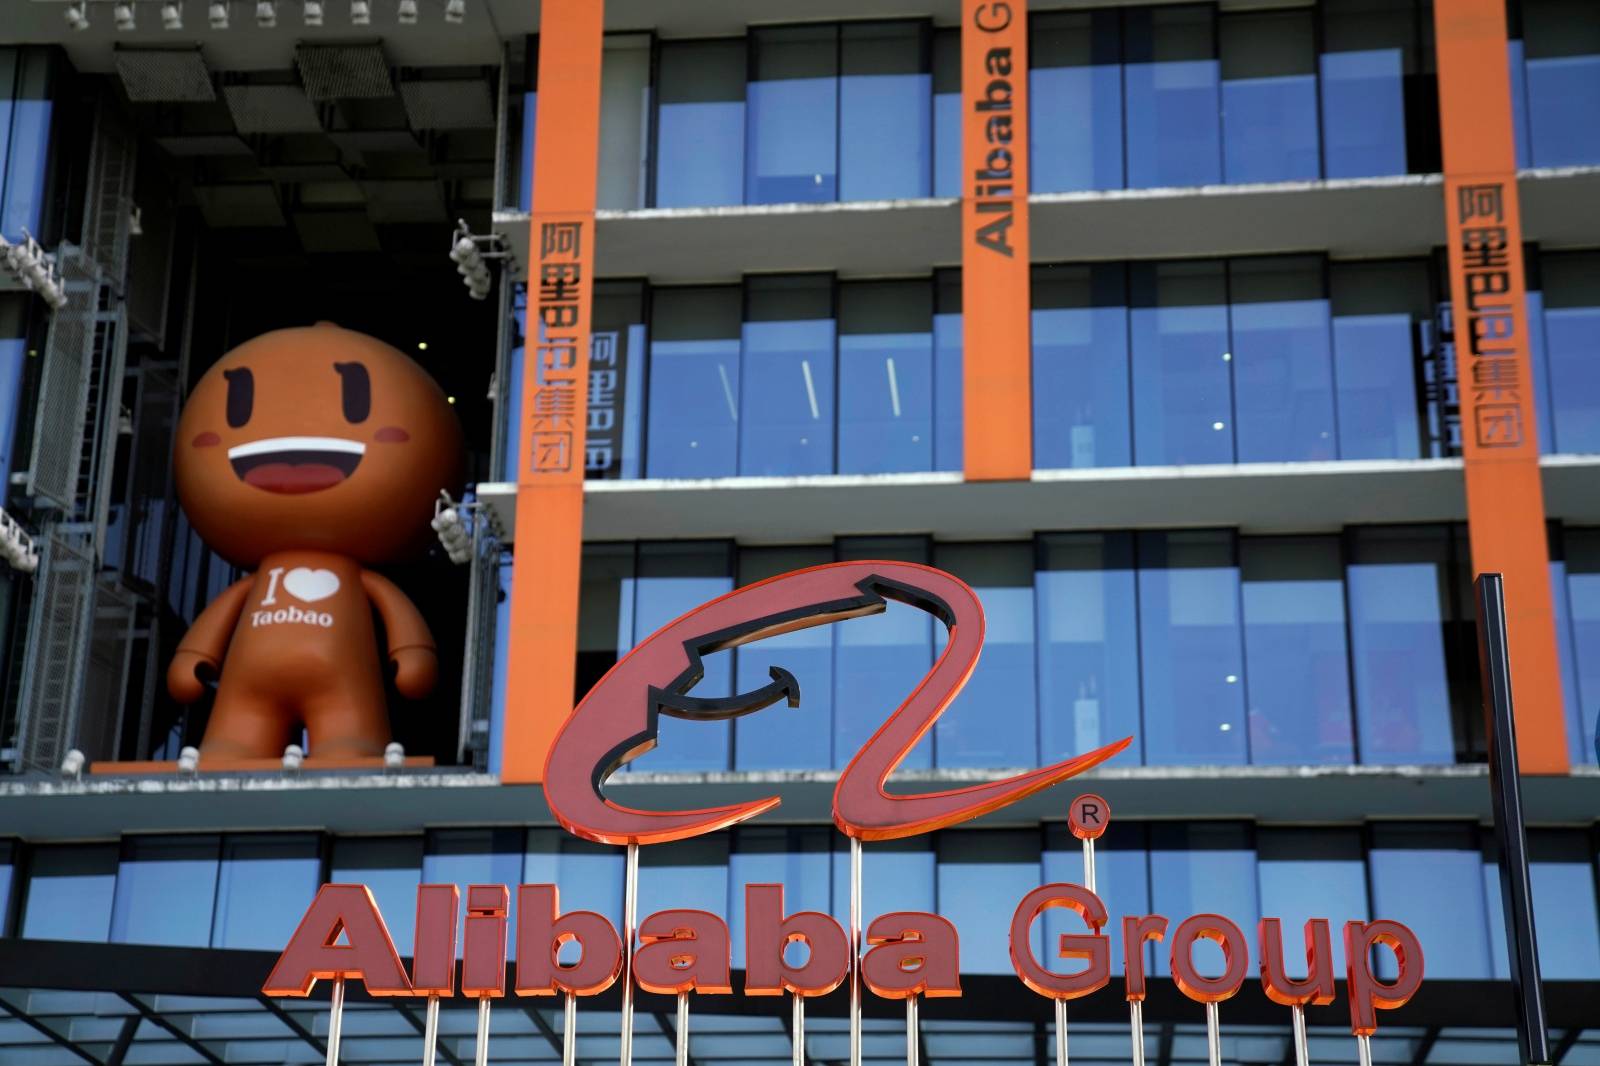 A logo of Alibaba Group is seen during Alibaba Group's 11.11 Singles' Day global shopping festival at the company's headquarters in Hangzhou